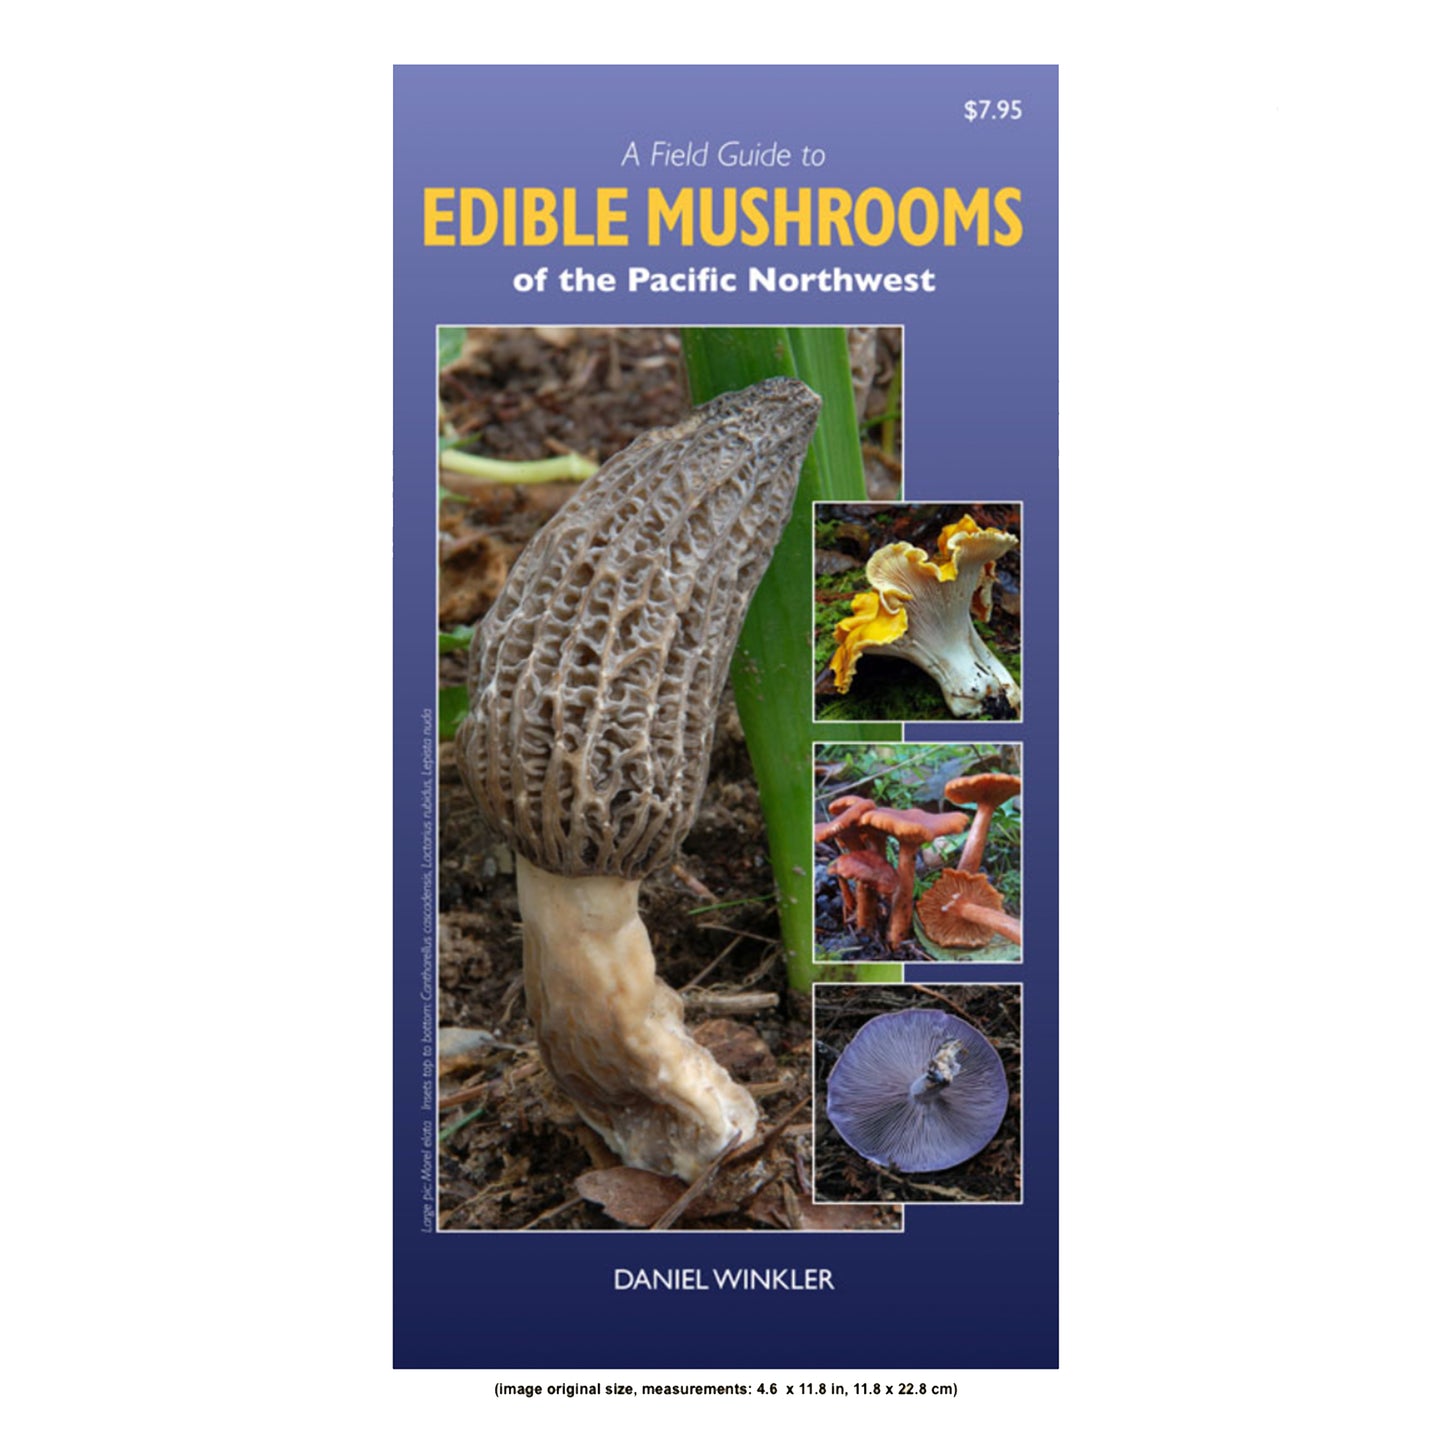 A Field Guide to Edible Mushrooms of the Pacific Northwest by Daniel Winkler